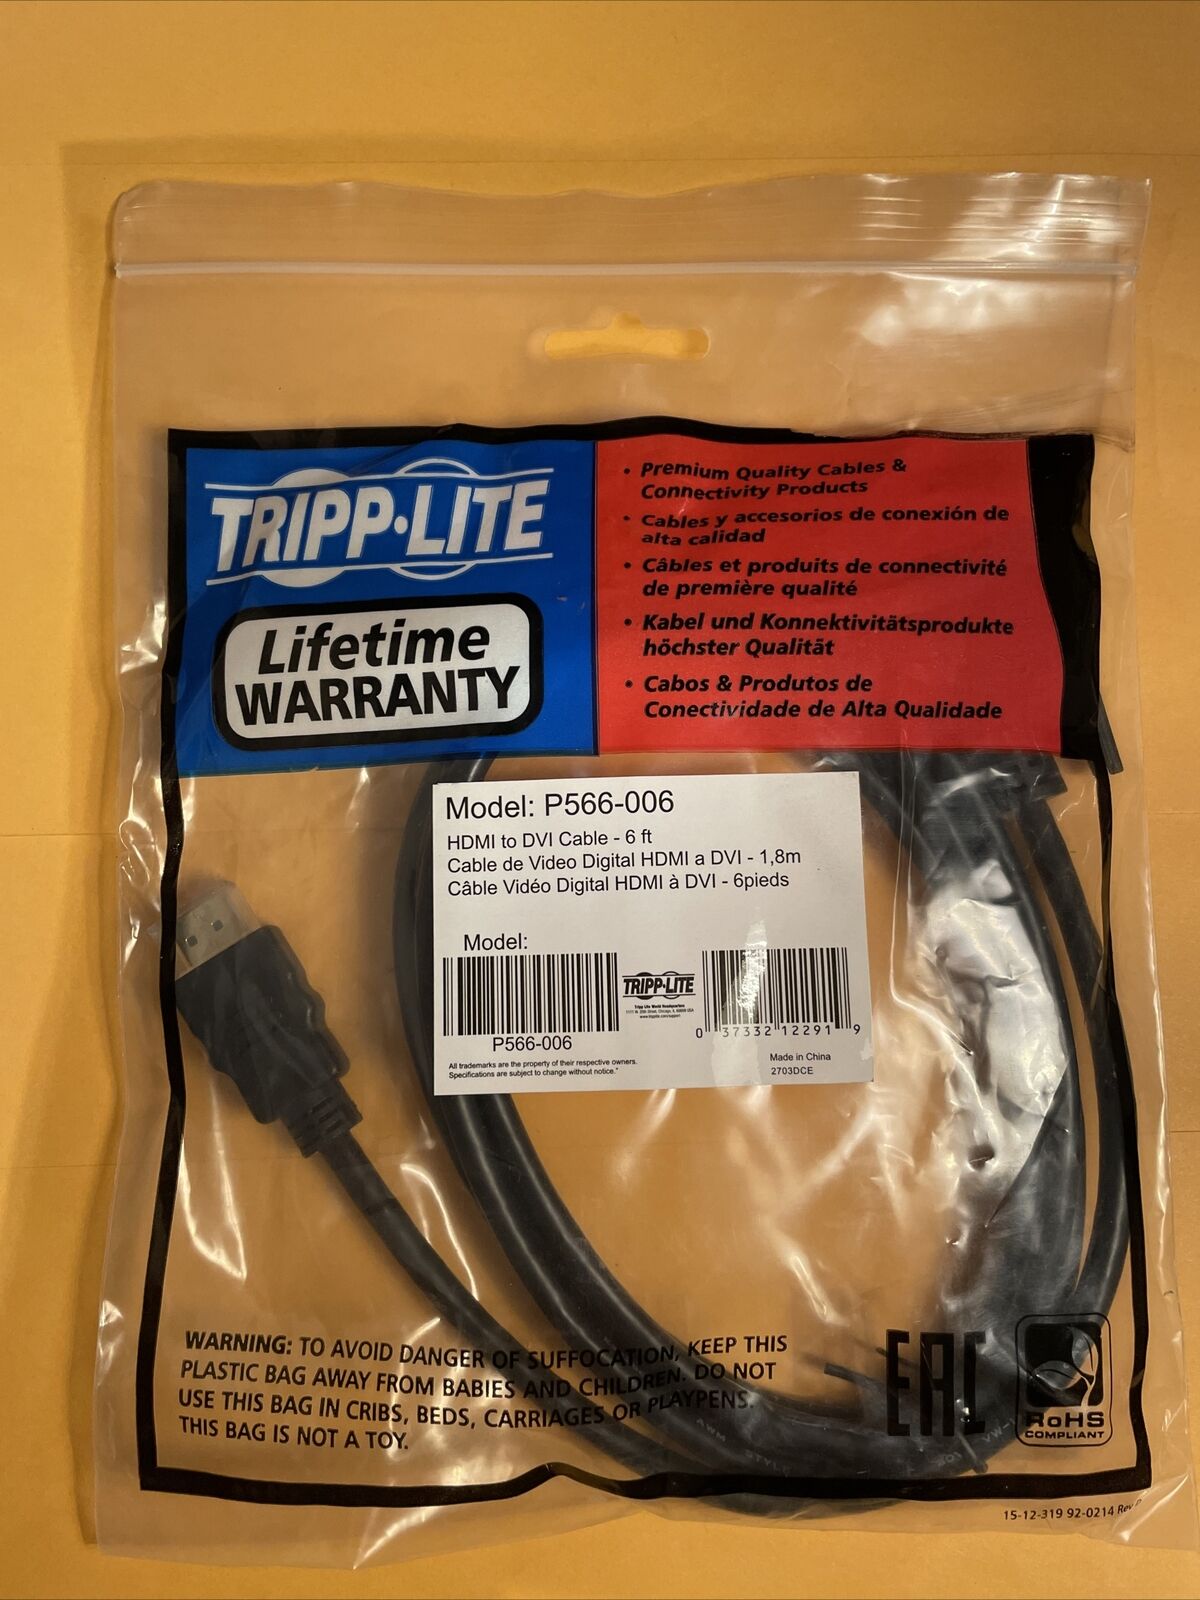 HDMI to DVI 6ft Cable High Quality TRIPPLITE P566-006.